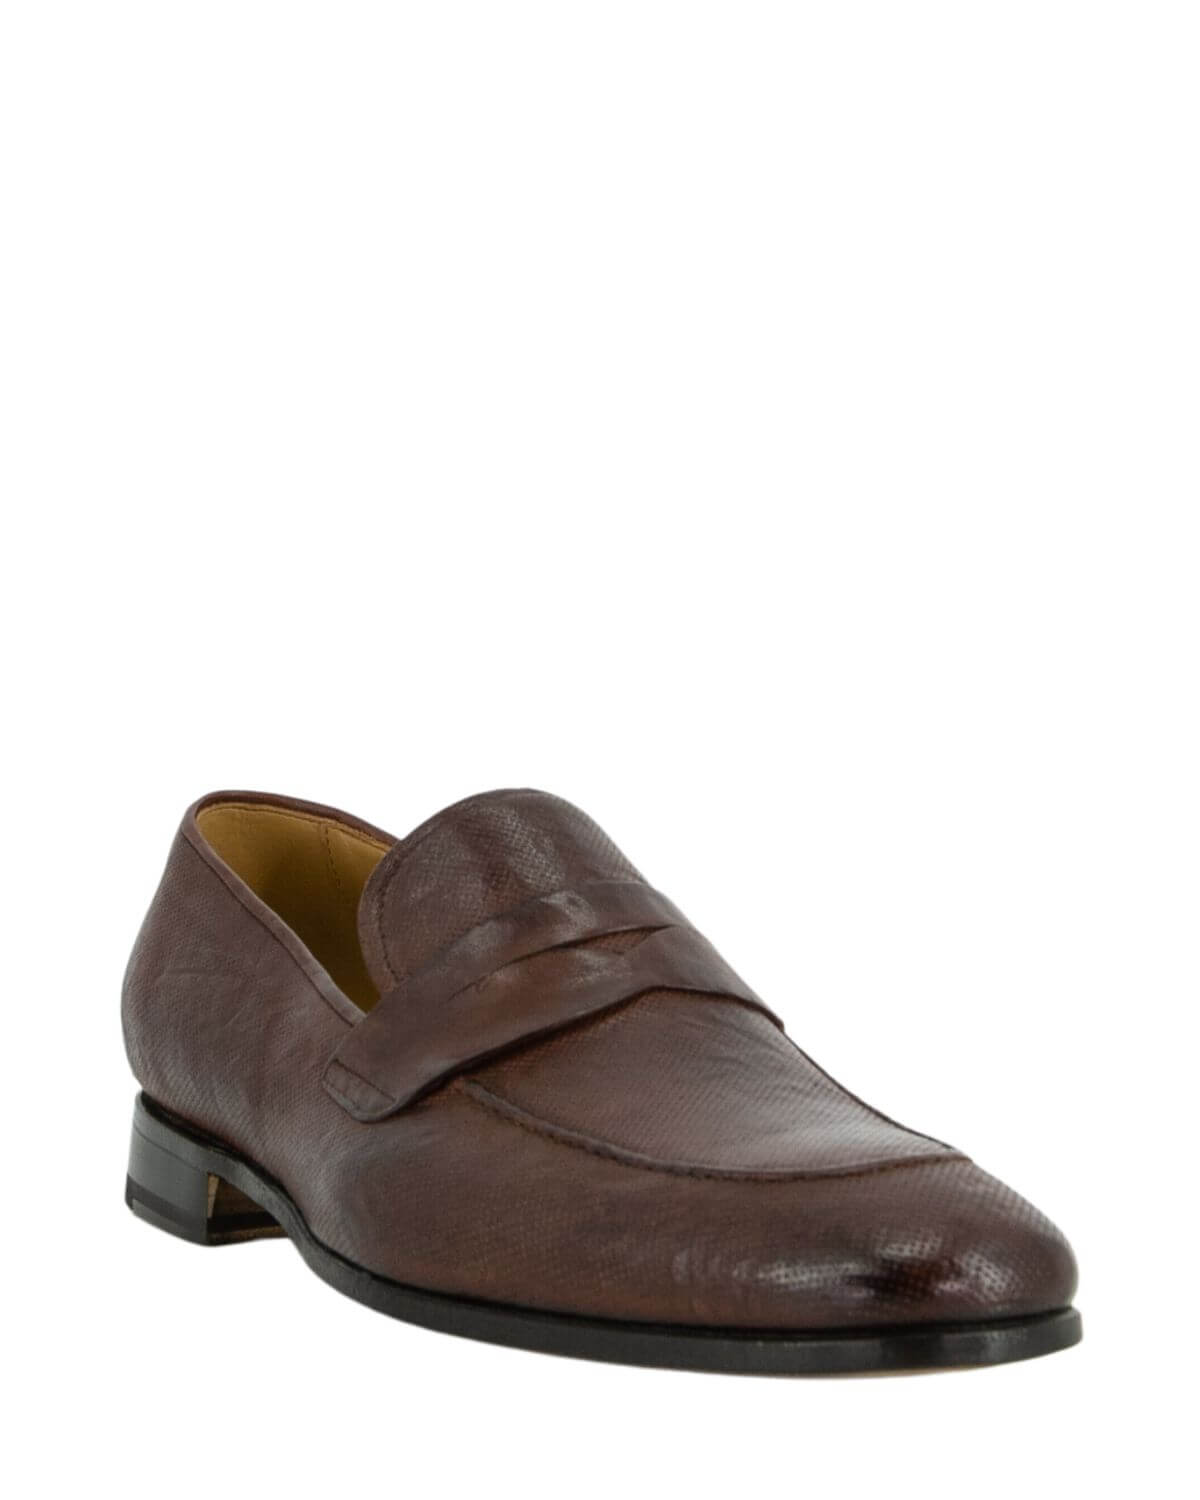 LOAFERS BUCATO